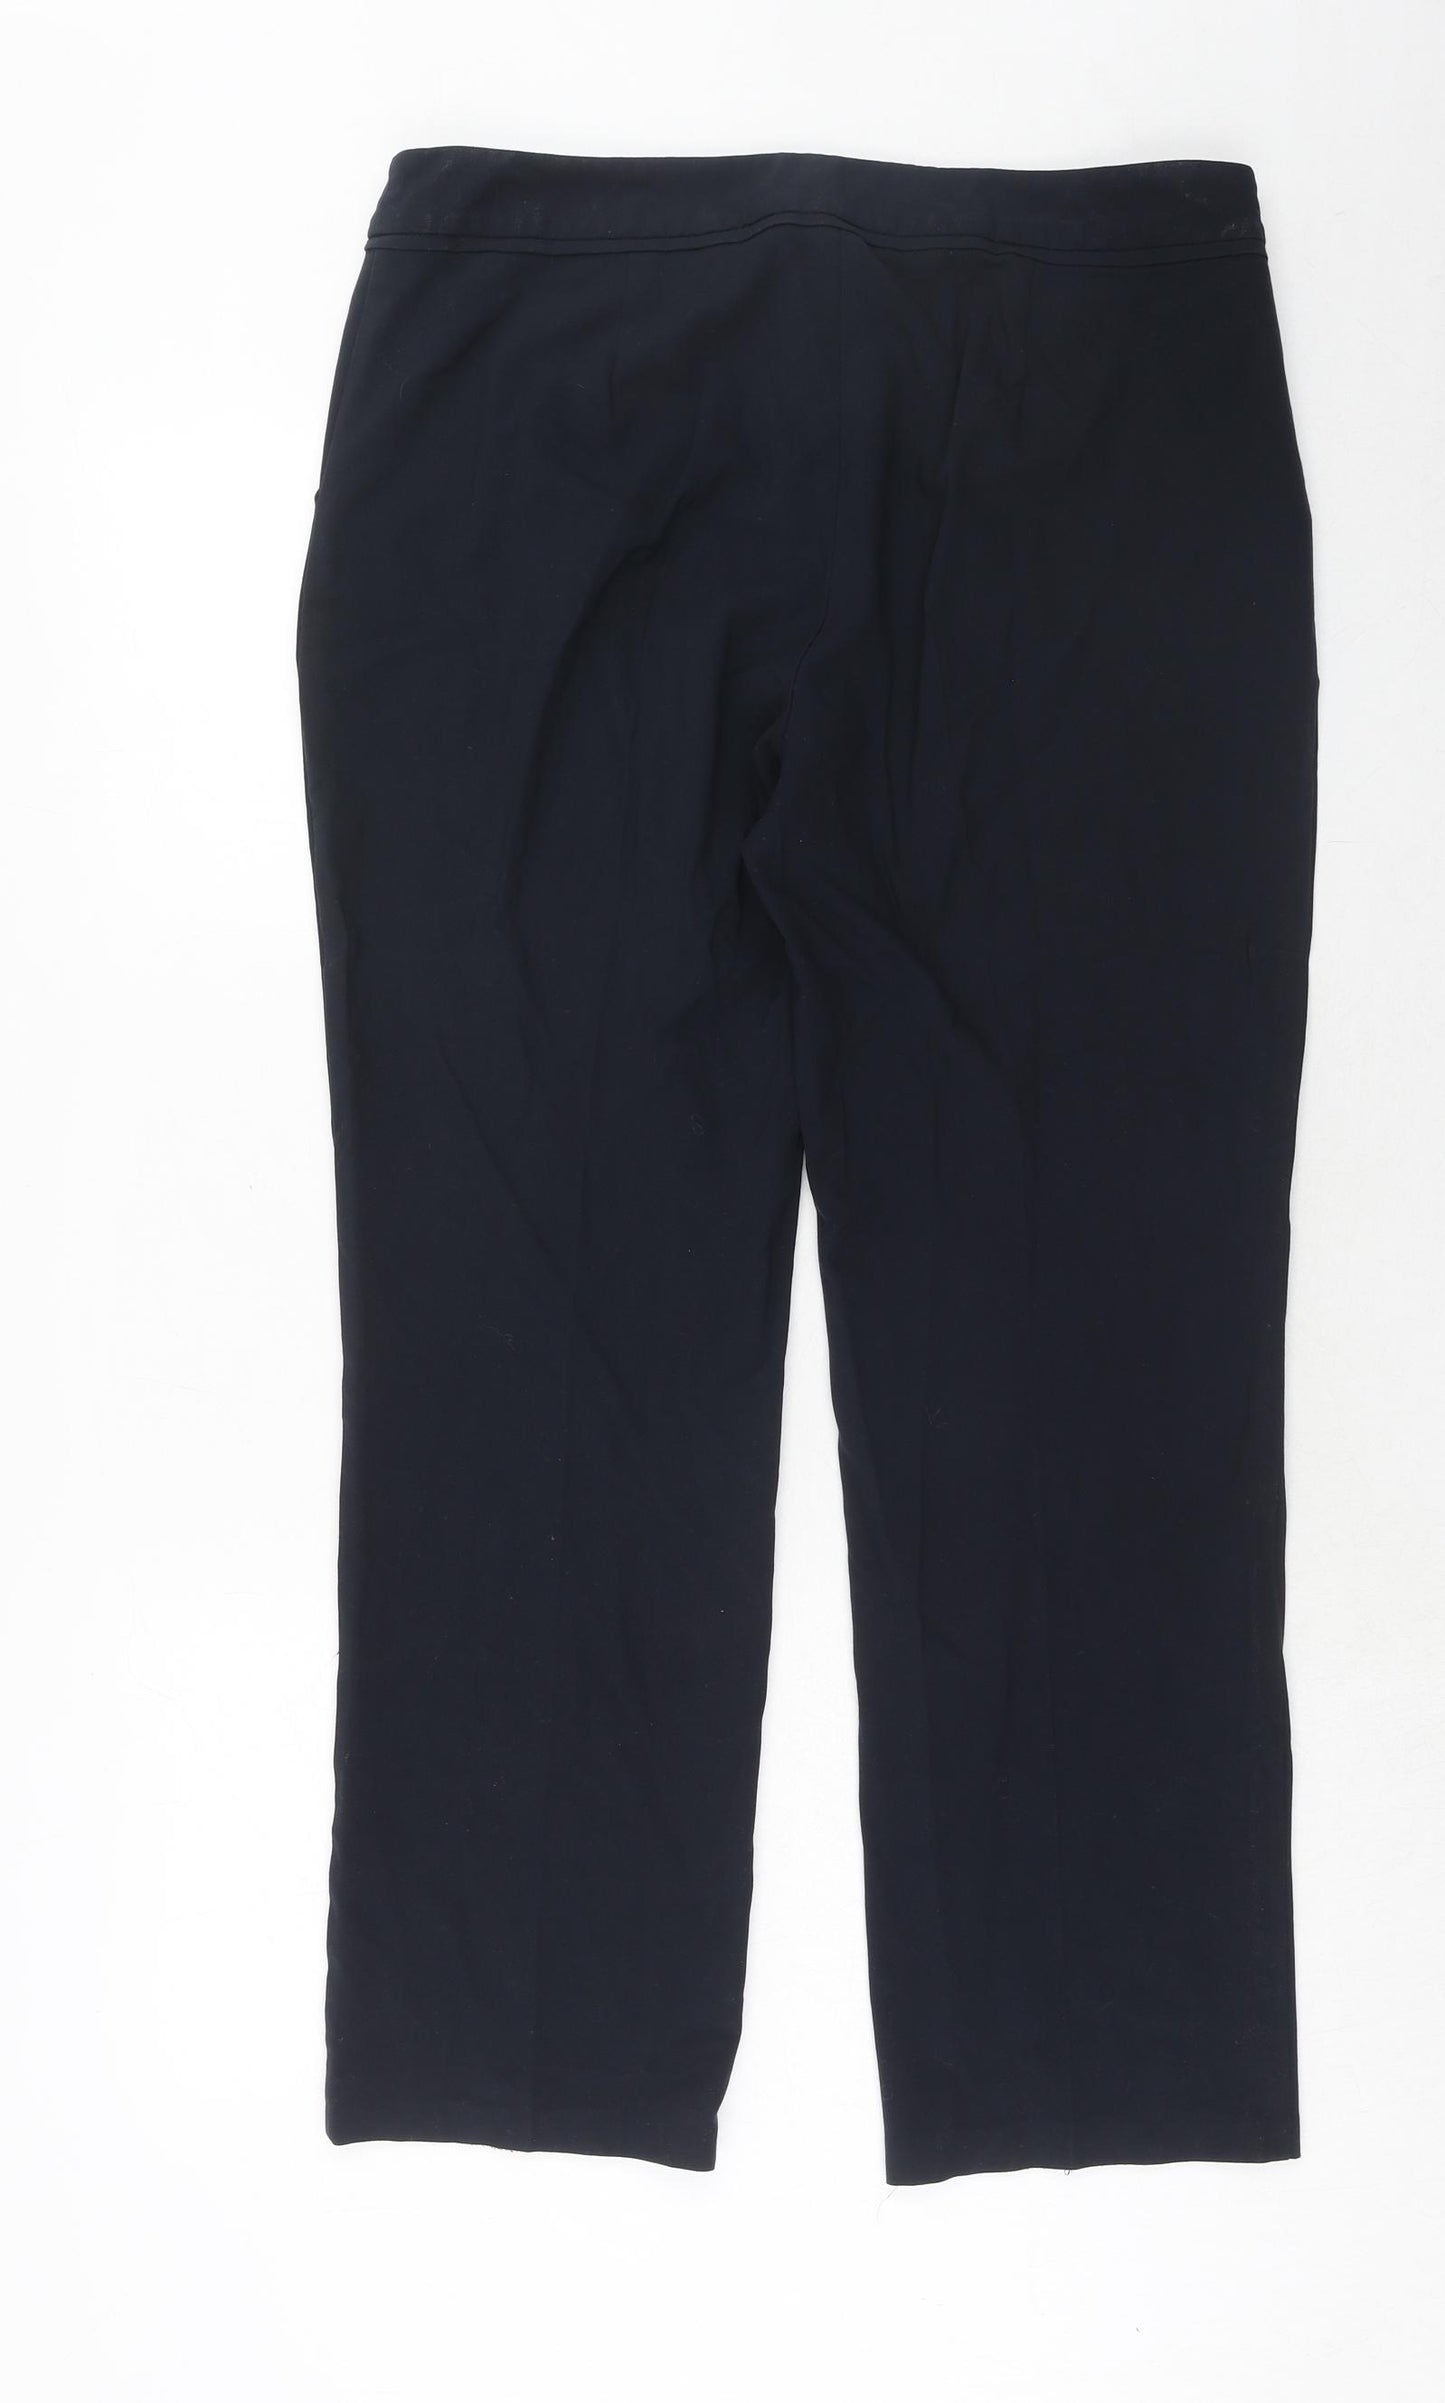 Marks and Spencer Womens Blue Polyester Dress Pants Trousers Size 14 Regular Button